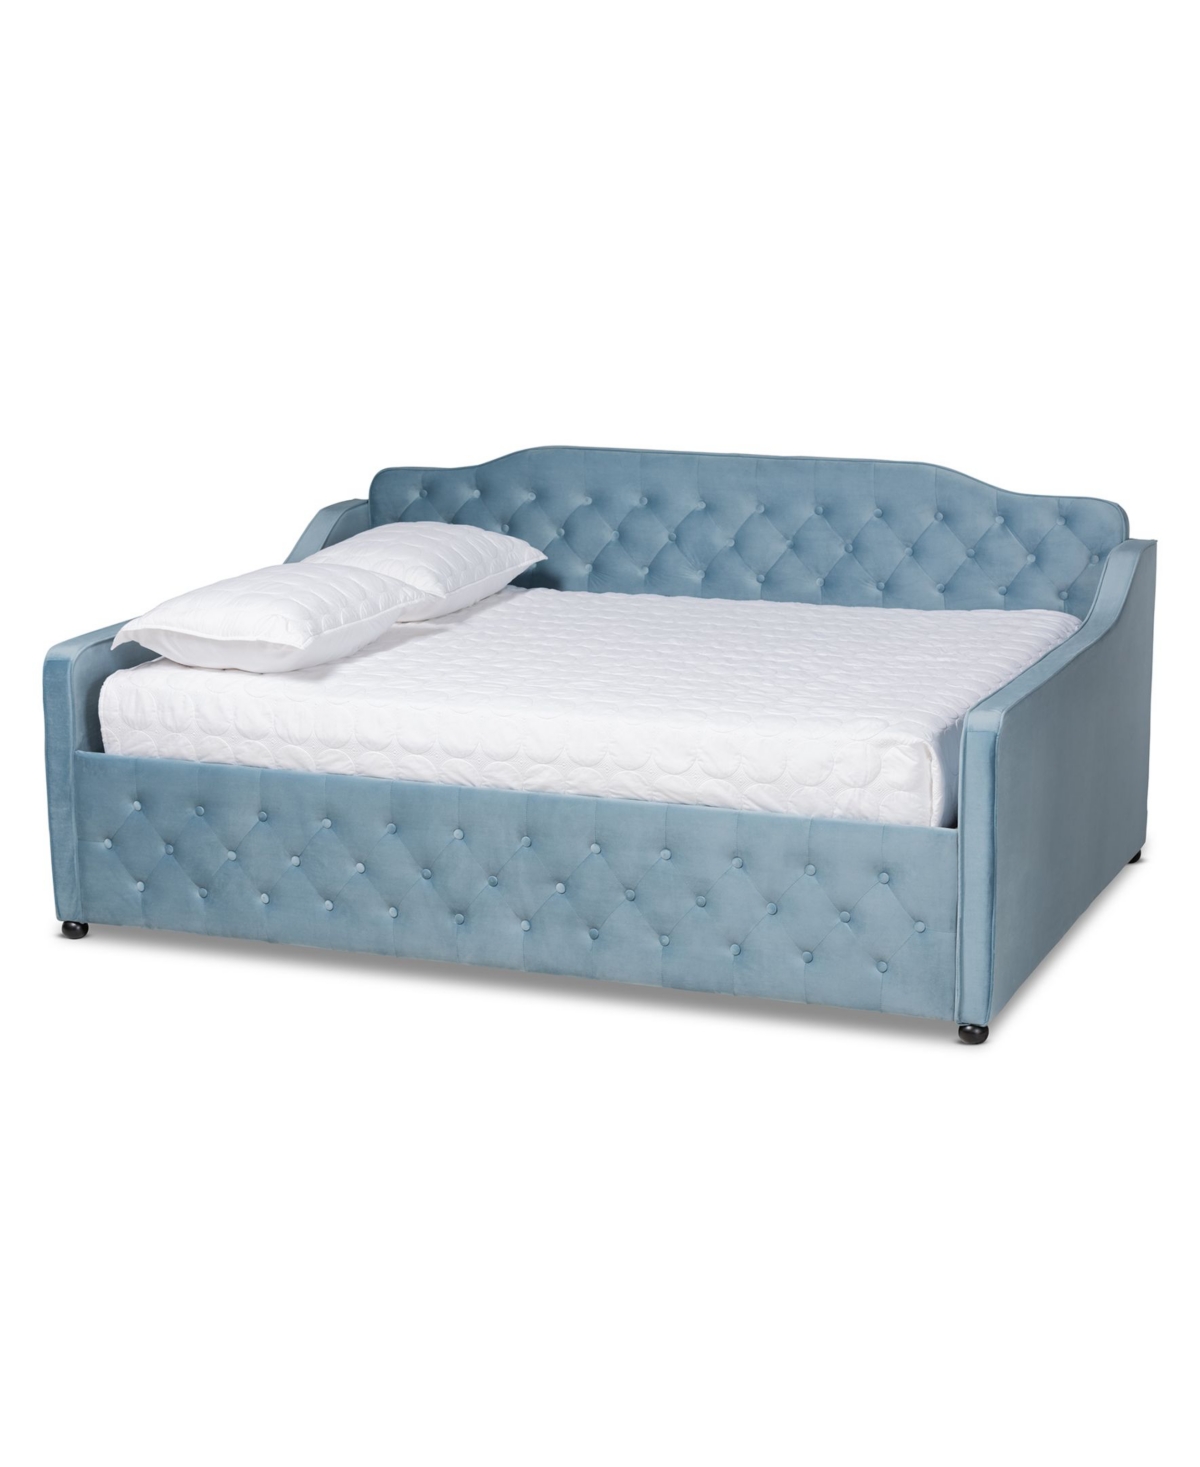 11629854 Freda Transitional and Contemporary Queen Size Day sku 11629854